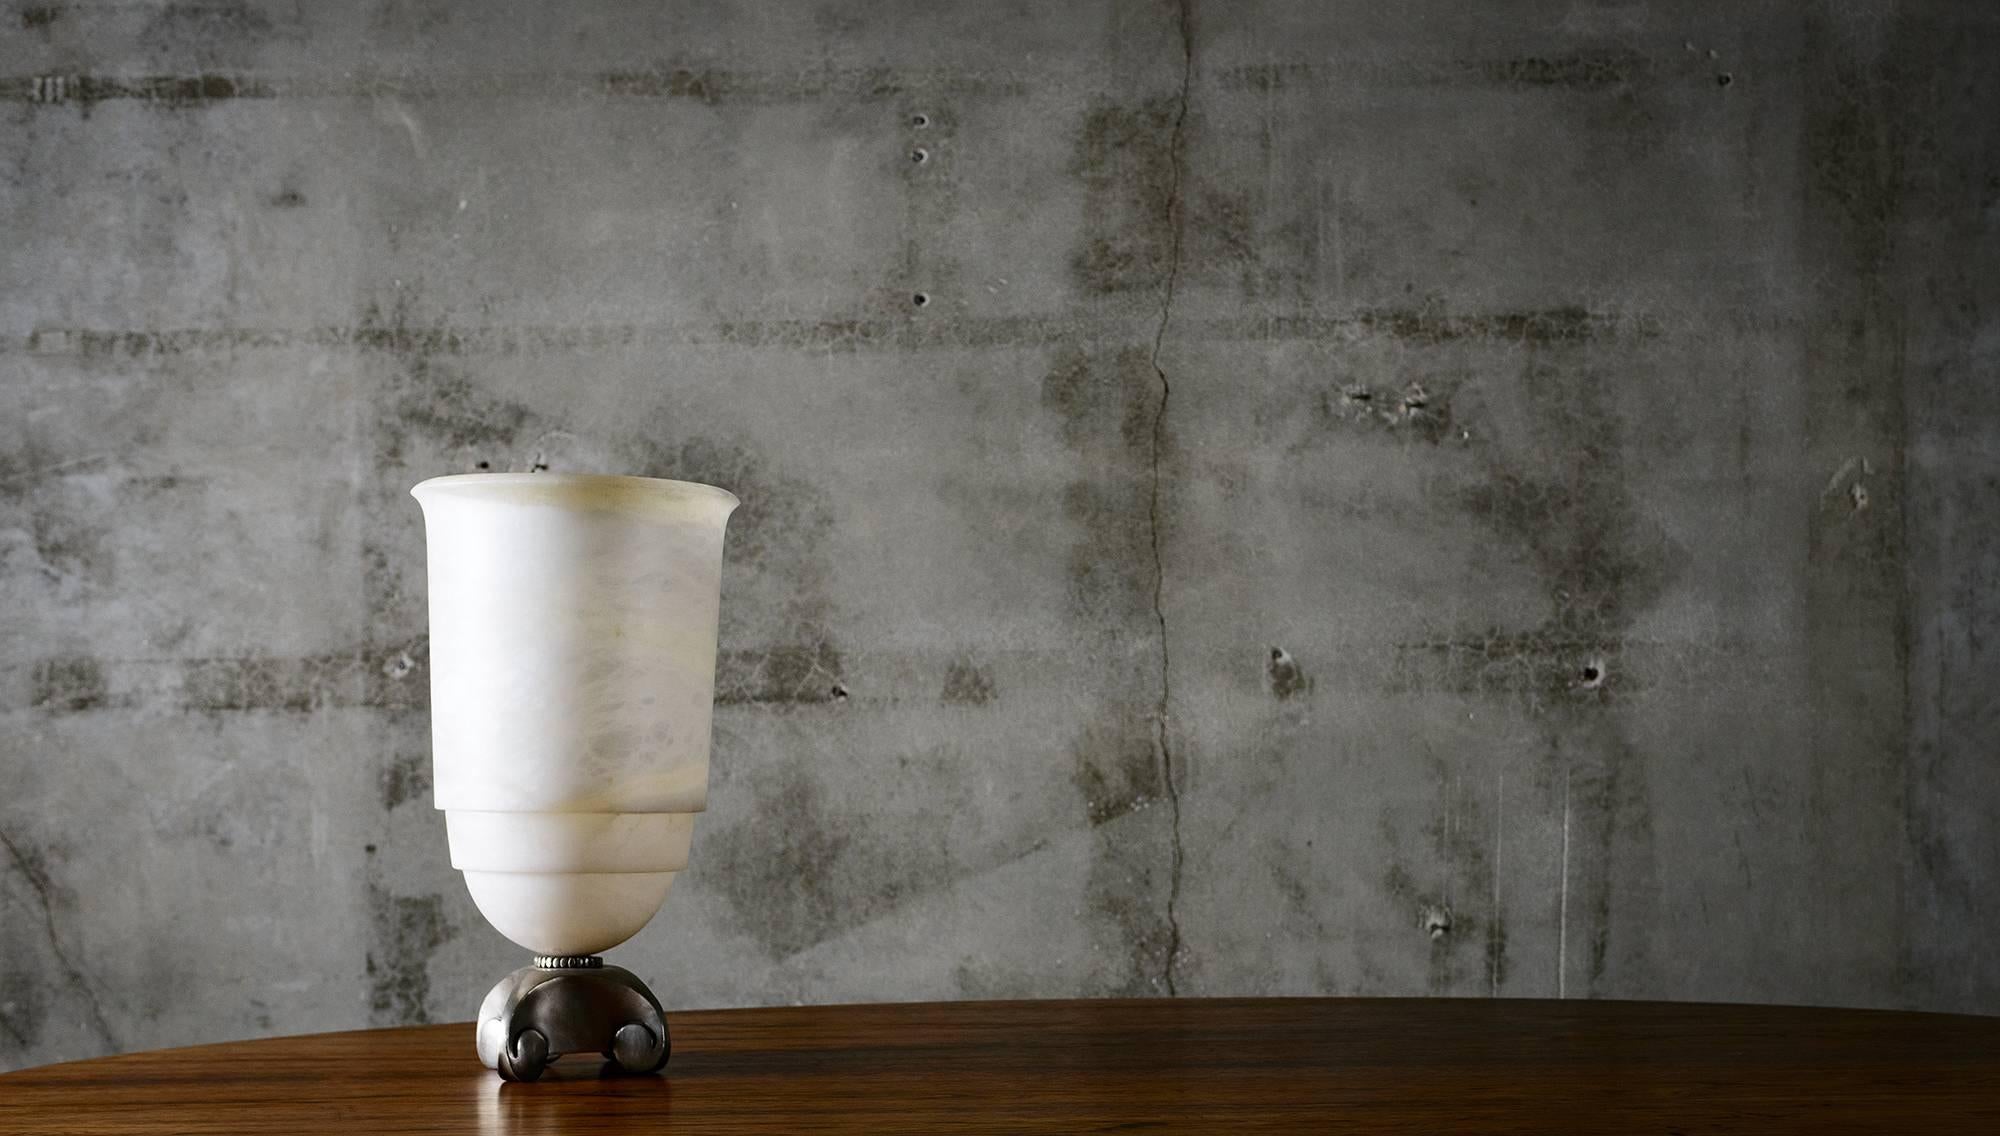 Evoking the heritage of French master craftsmen Emile-Jacques Ruhlmann, this lamp vase made from alabaster with silvered bronze base is notable for its classical simplicity crafted with the finest materials, harmonious proportions, architectural